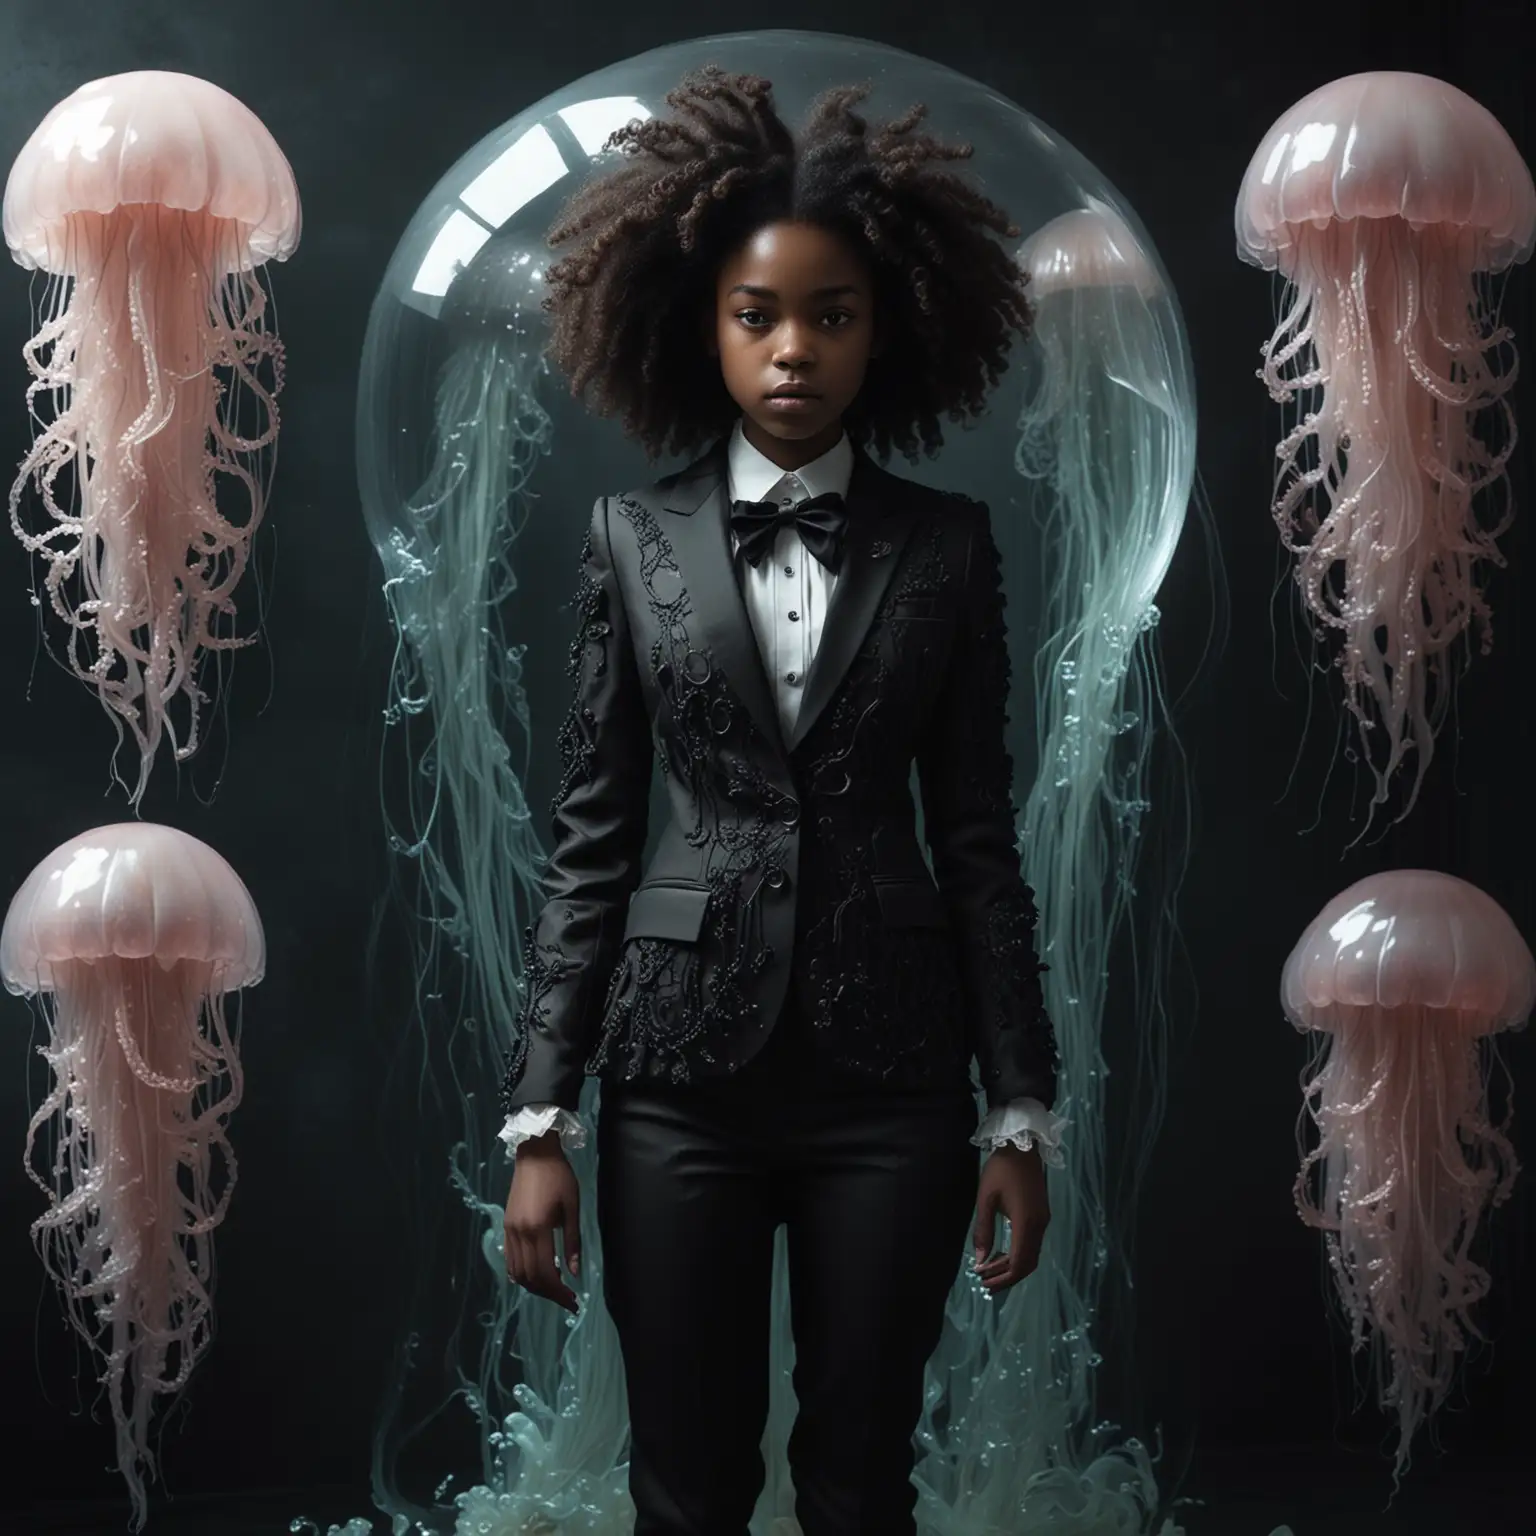 Black Girl Wearing Jellyfish Suit with Giant Pet Jellyfish Realistic and Rococo Style Image